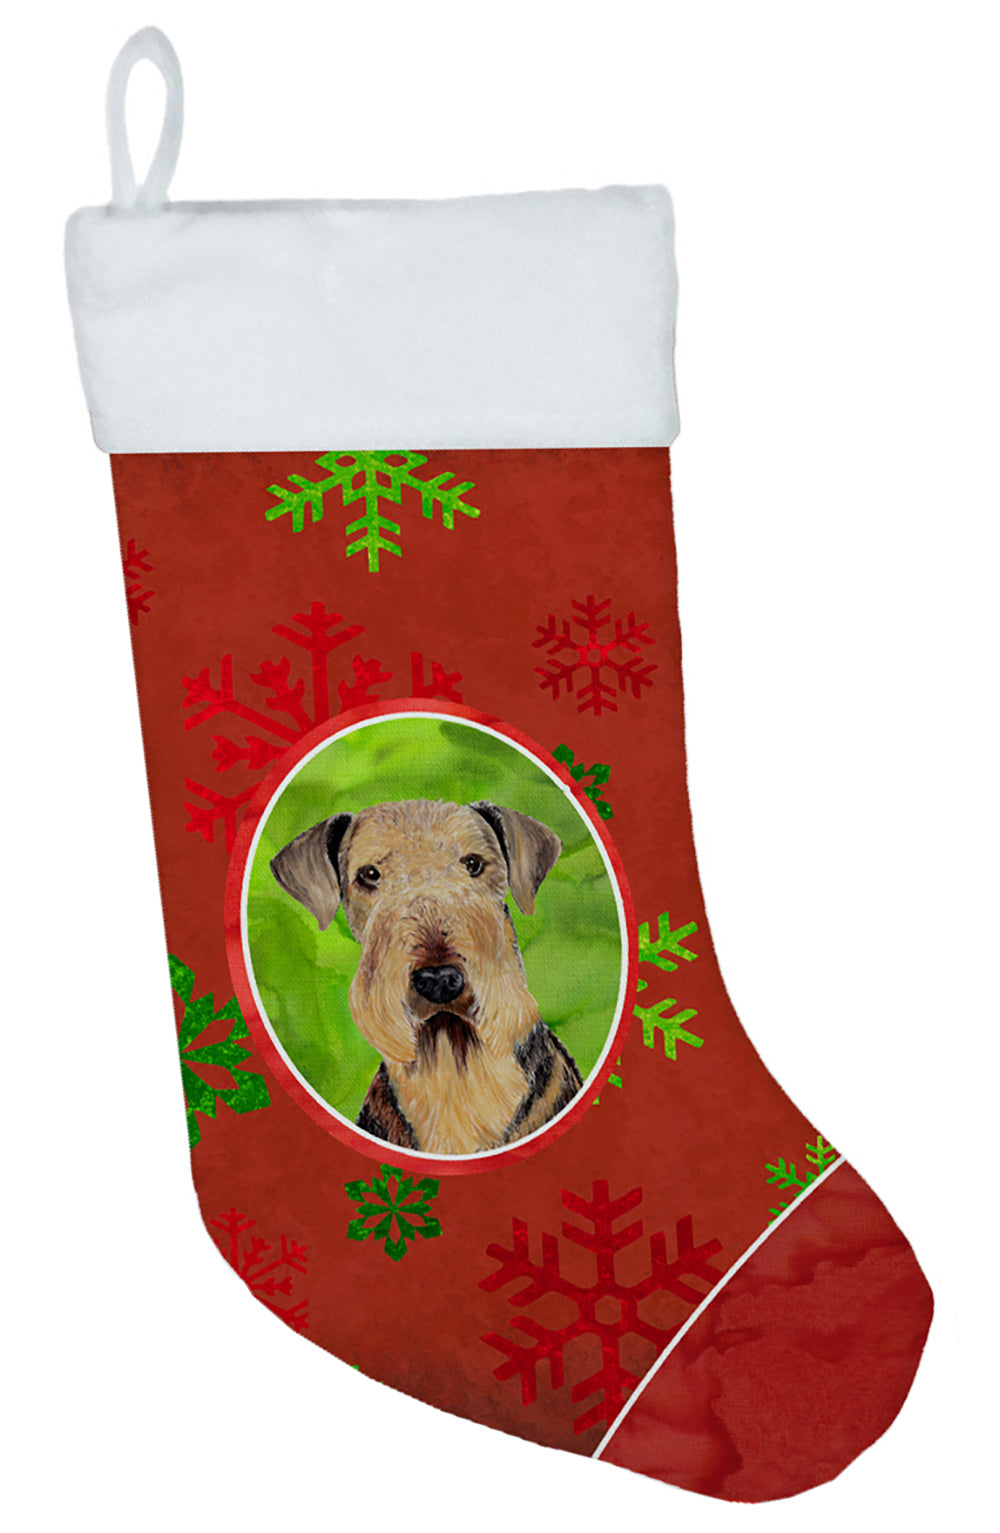 Airedale Red and Green Snowflakes Holiday Christmas Christmas Stocking SC9413